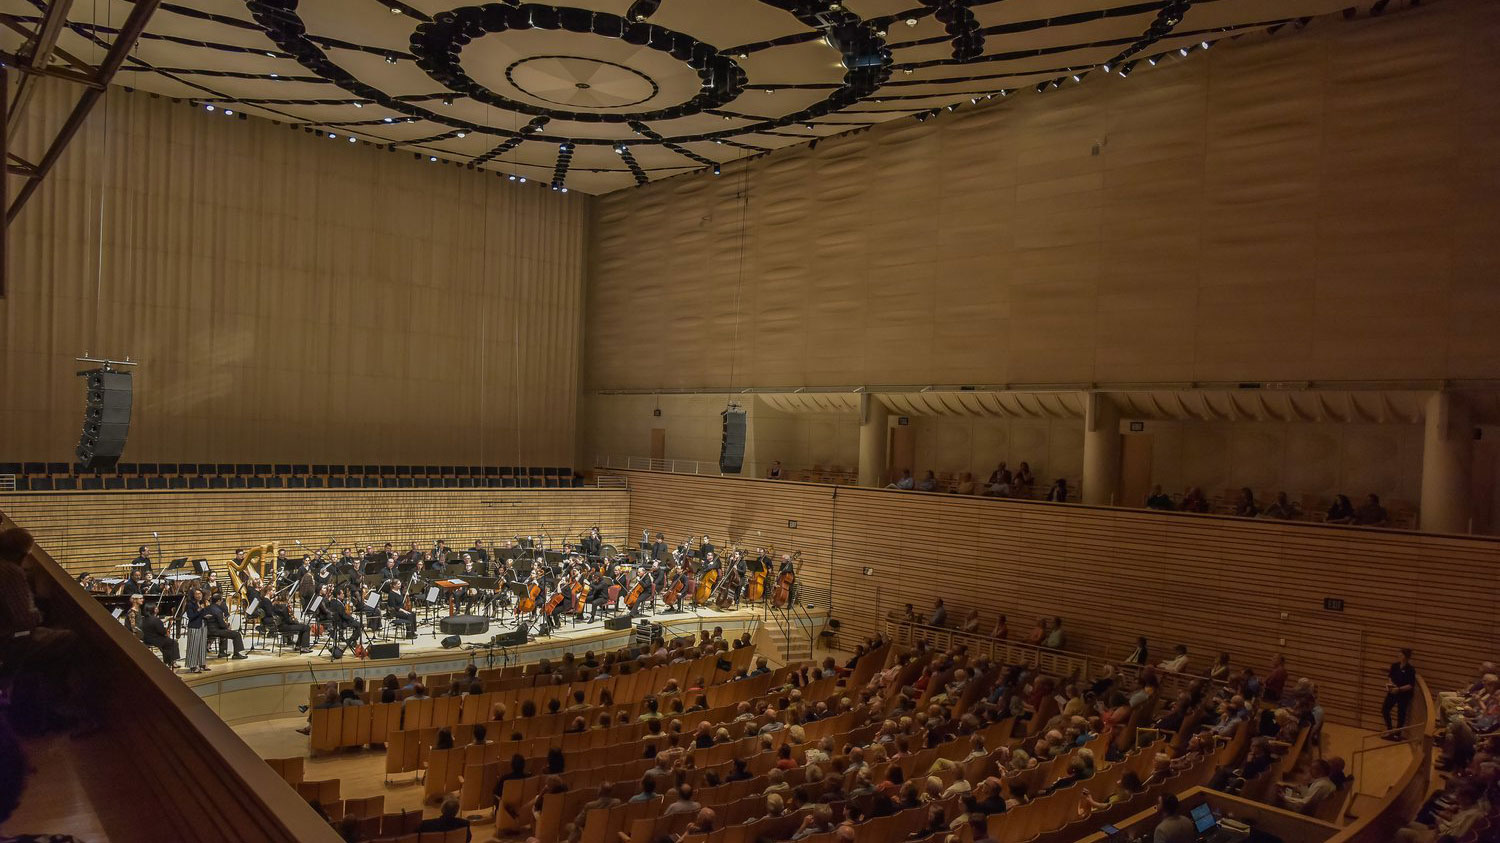 ASO's full orchestra on EMPAC's concert hall stage with a large audience.